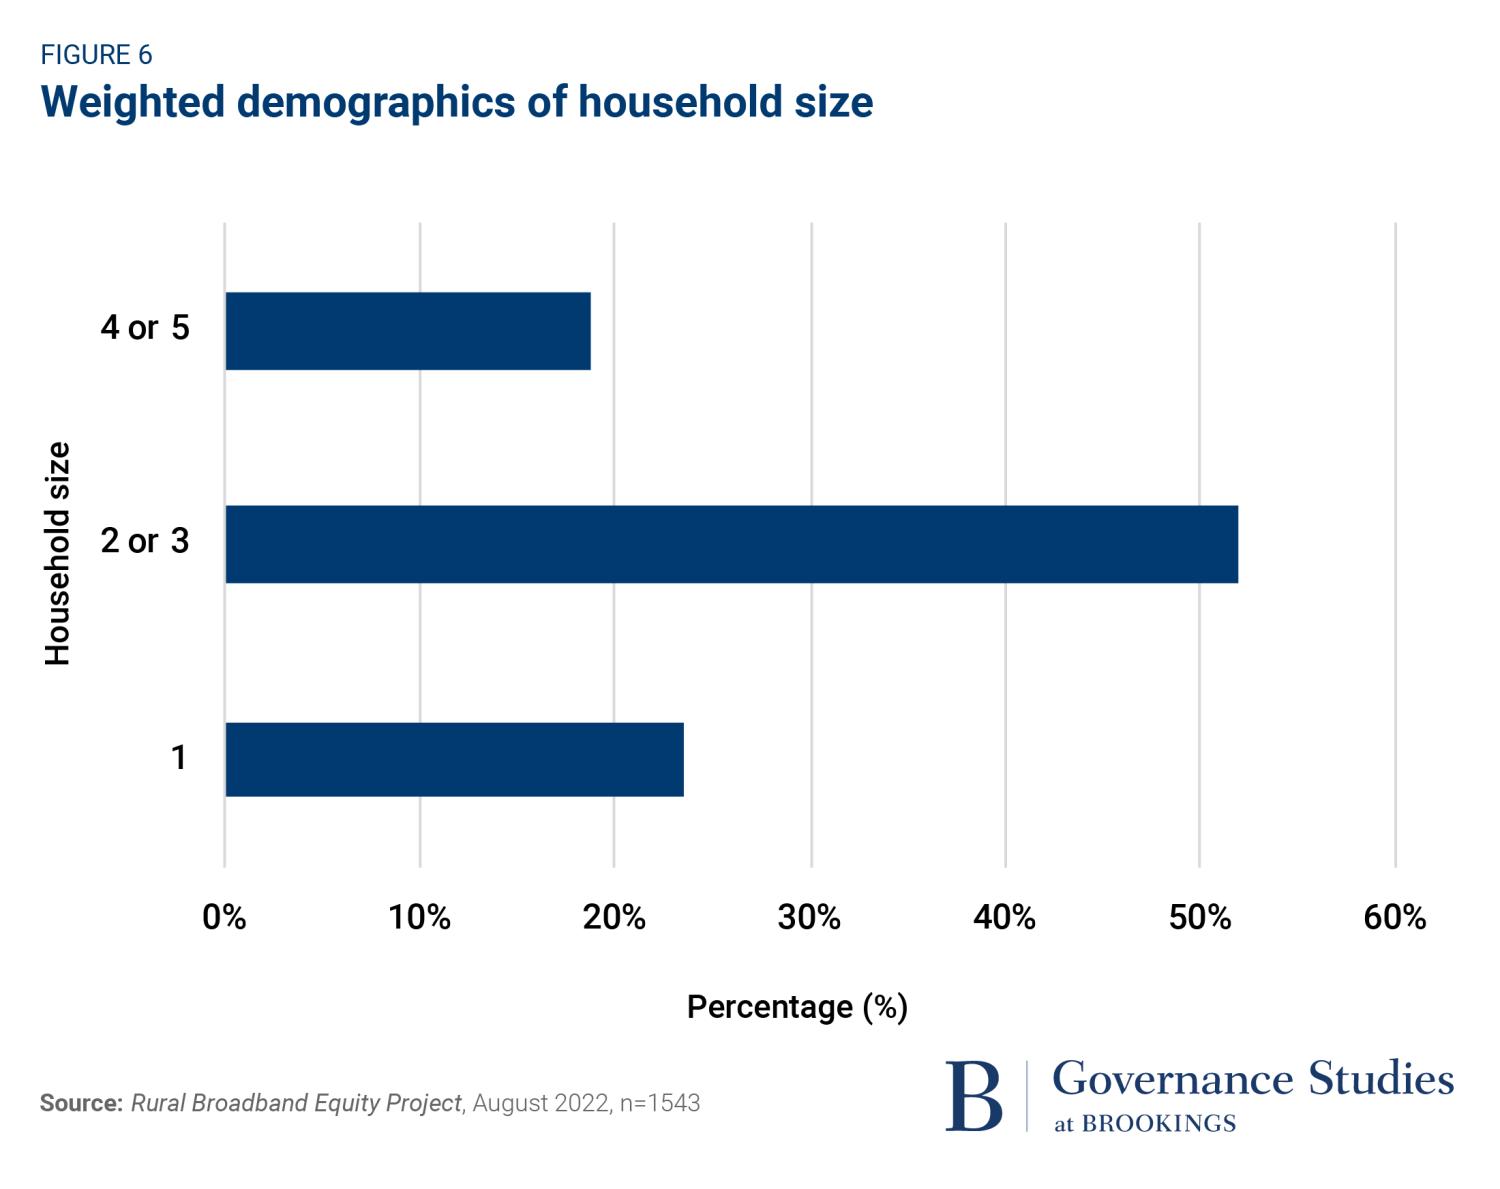 Weighted demographics on household size